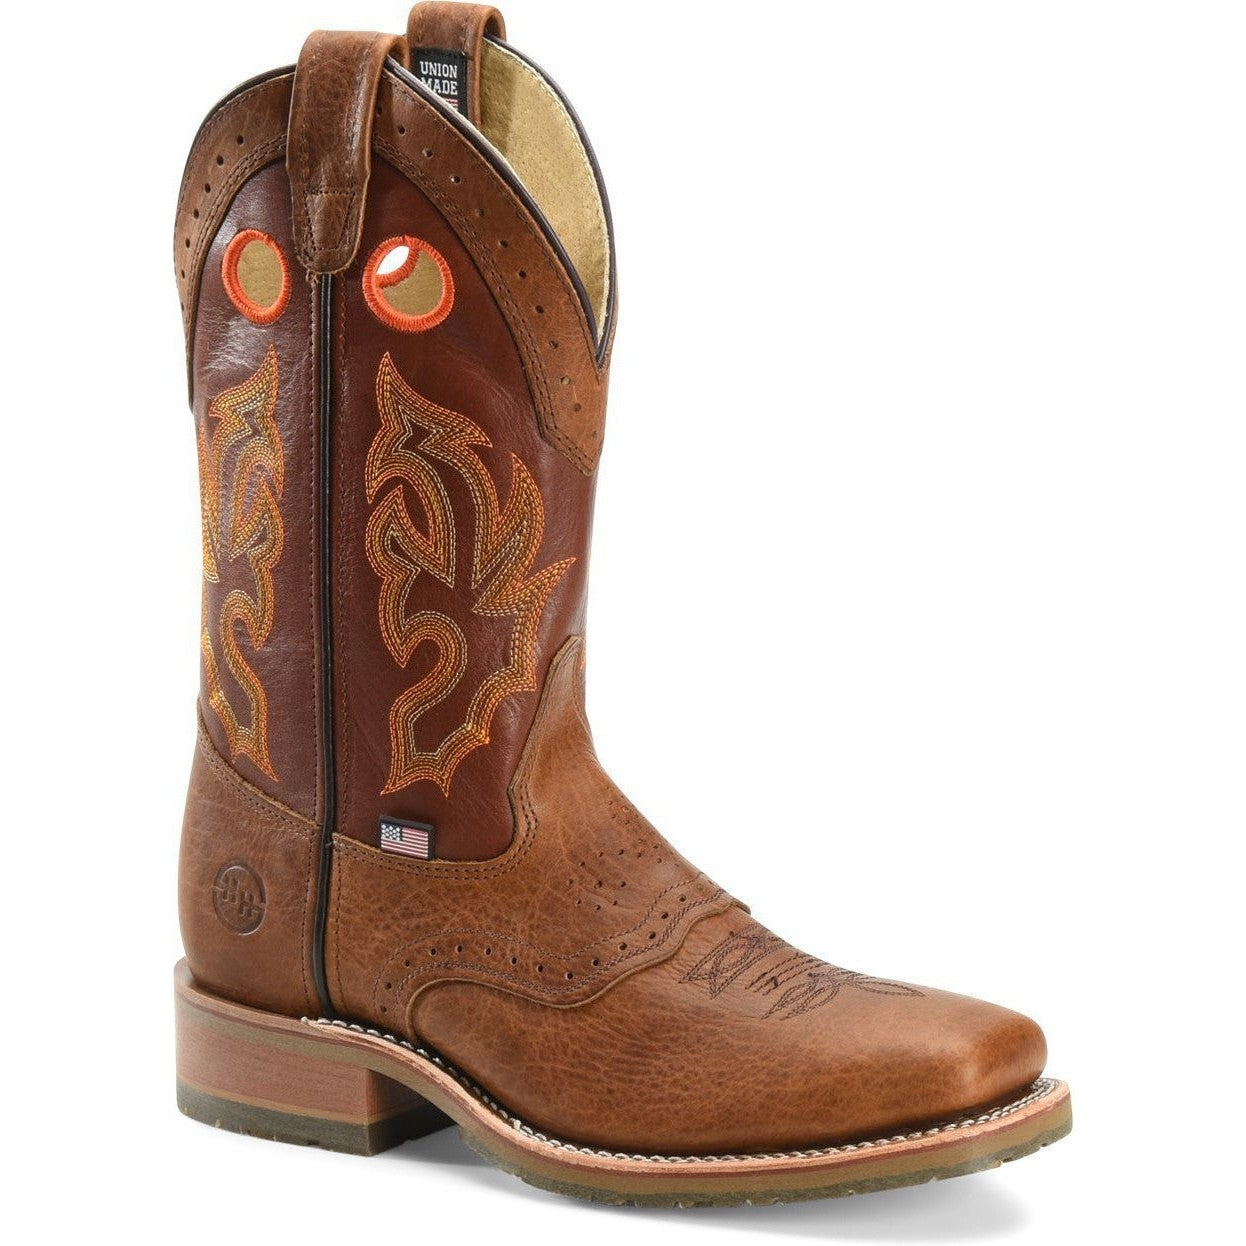 Double H Men's Mickey 12" Square Toe USA Made Western Work Boot DH4400 8 / Medium / Brown - Overlook Boots